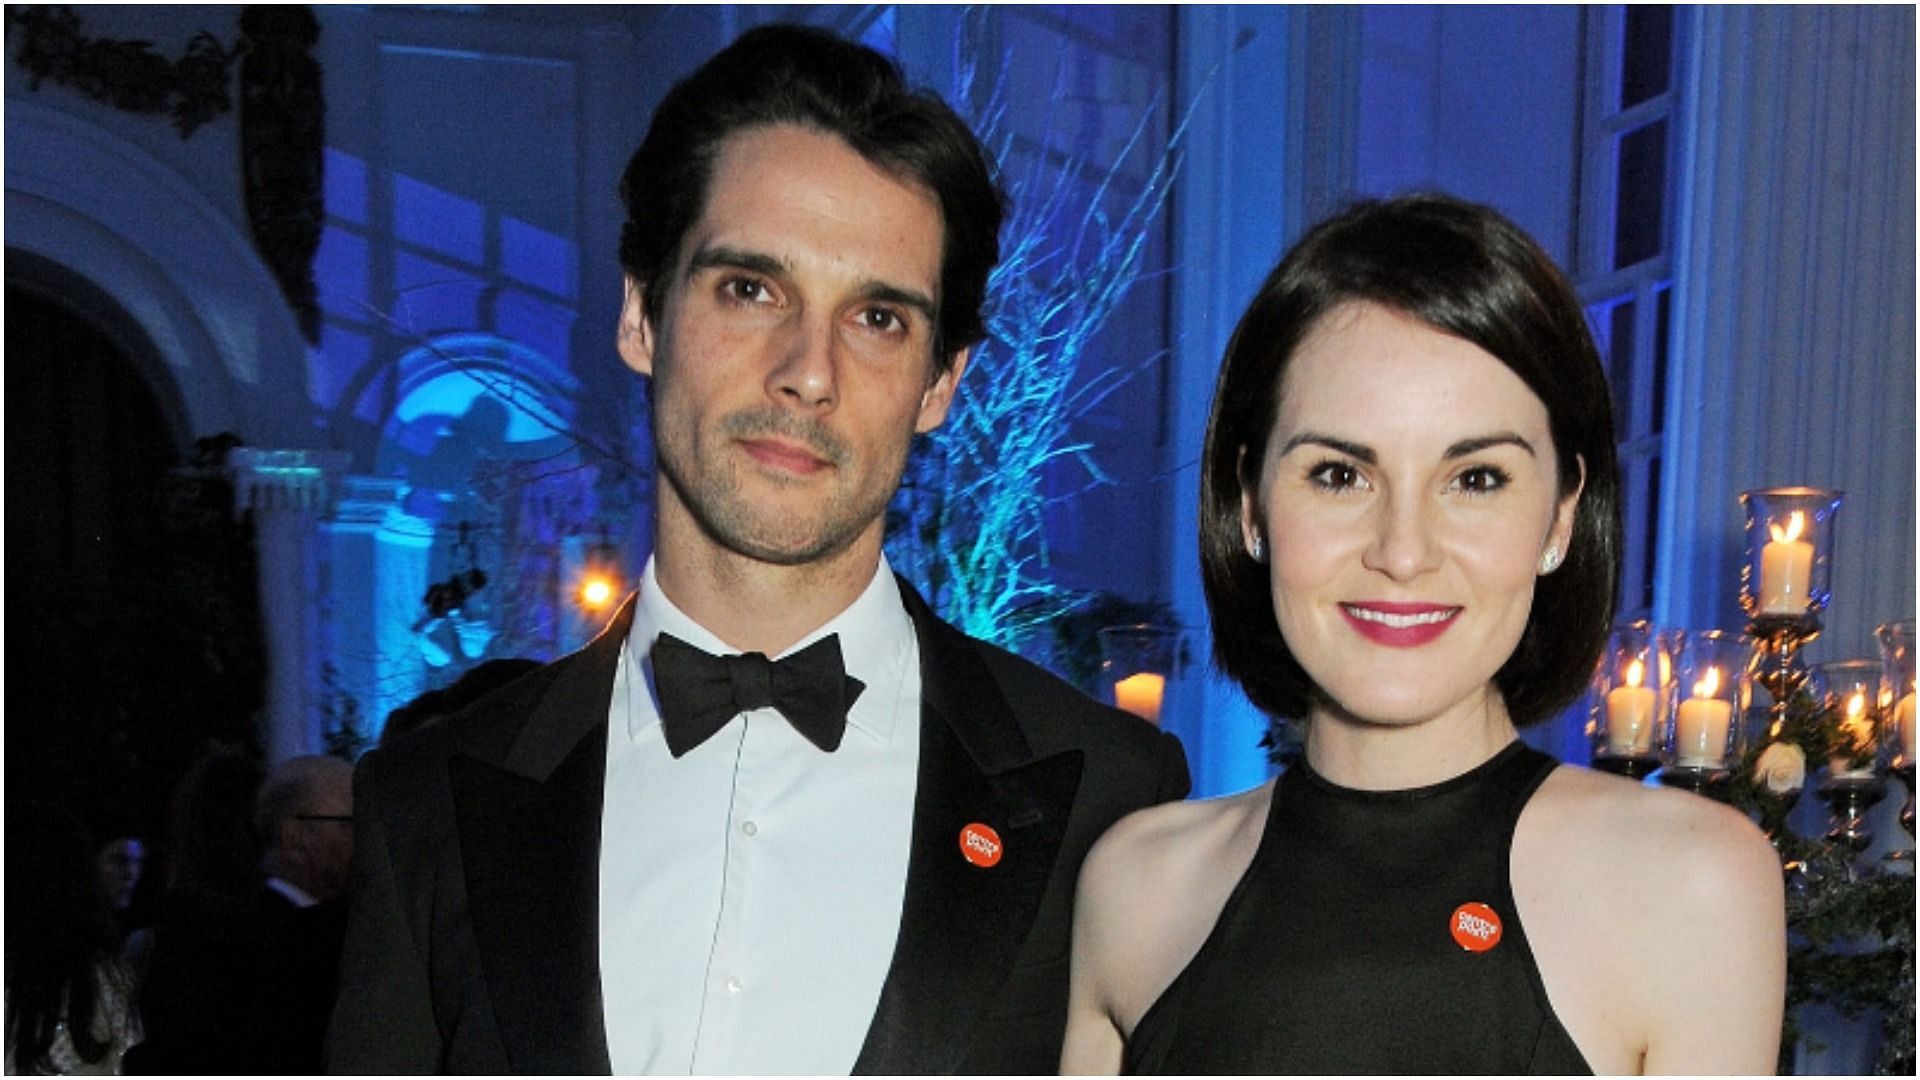 John Dineen and Michelle Dockery attend the Winter Whites Gala in aid of Centrepoint at Kensington Palace (Image via David M. Benett/Getty Images)